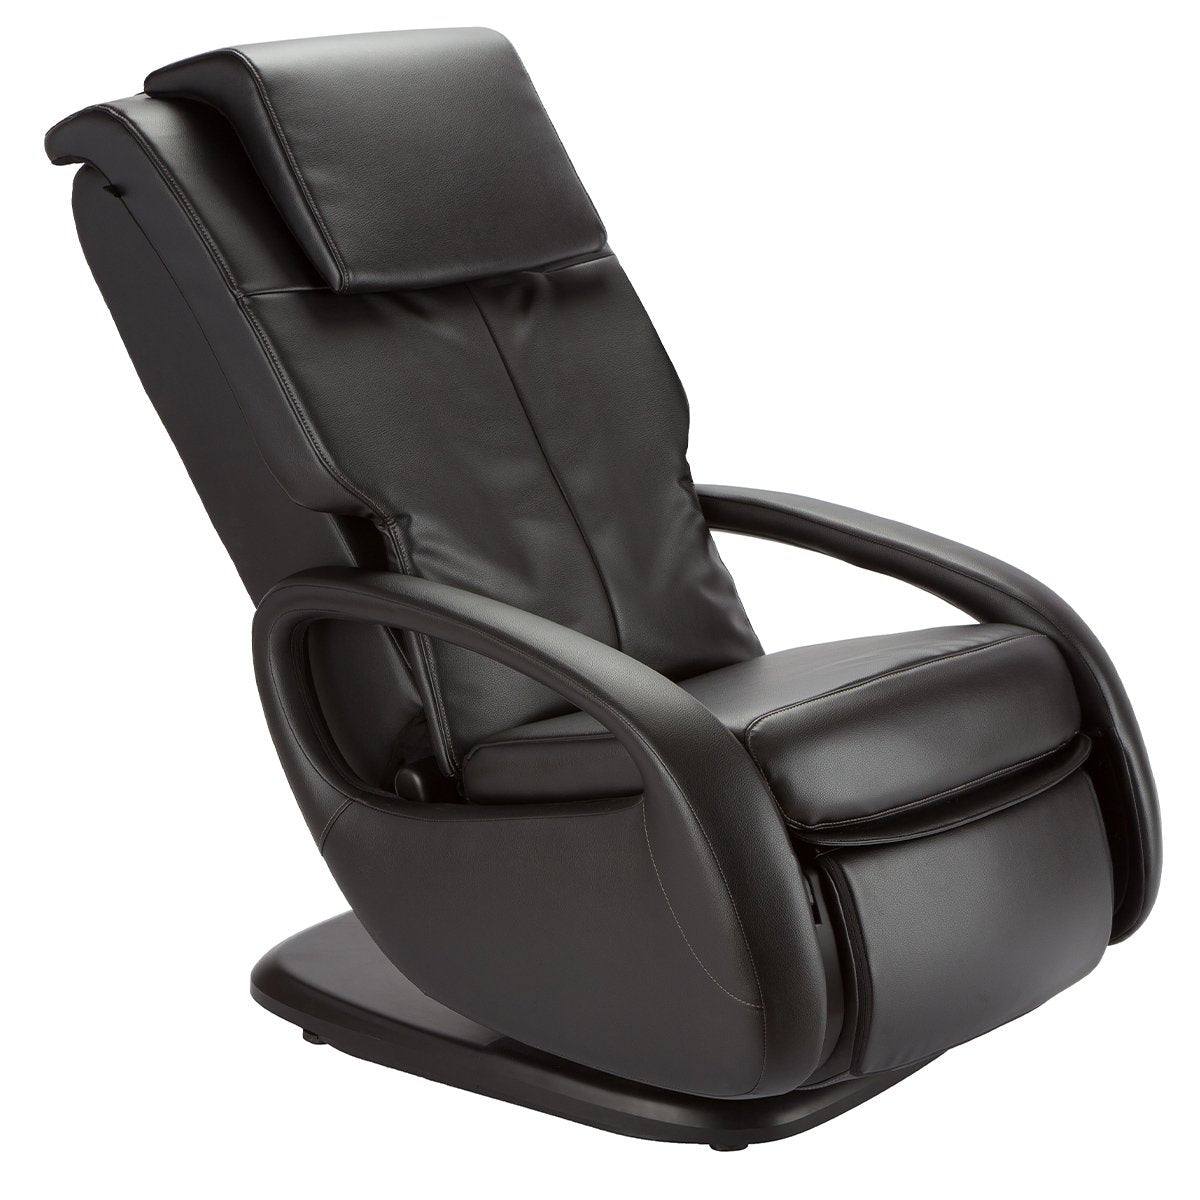 Human Touch WholeBody 7.1 3D Massage Chair —